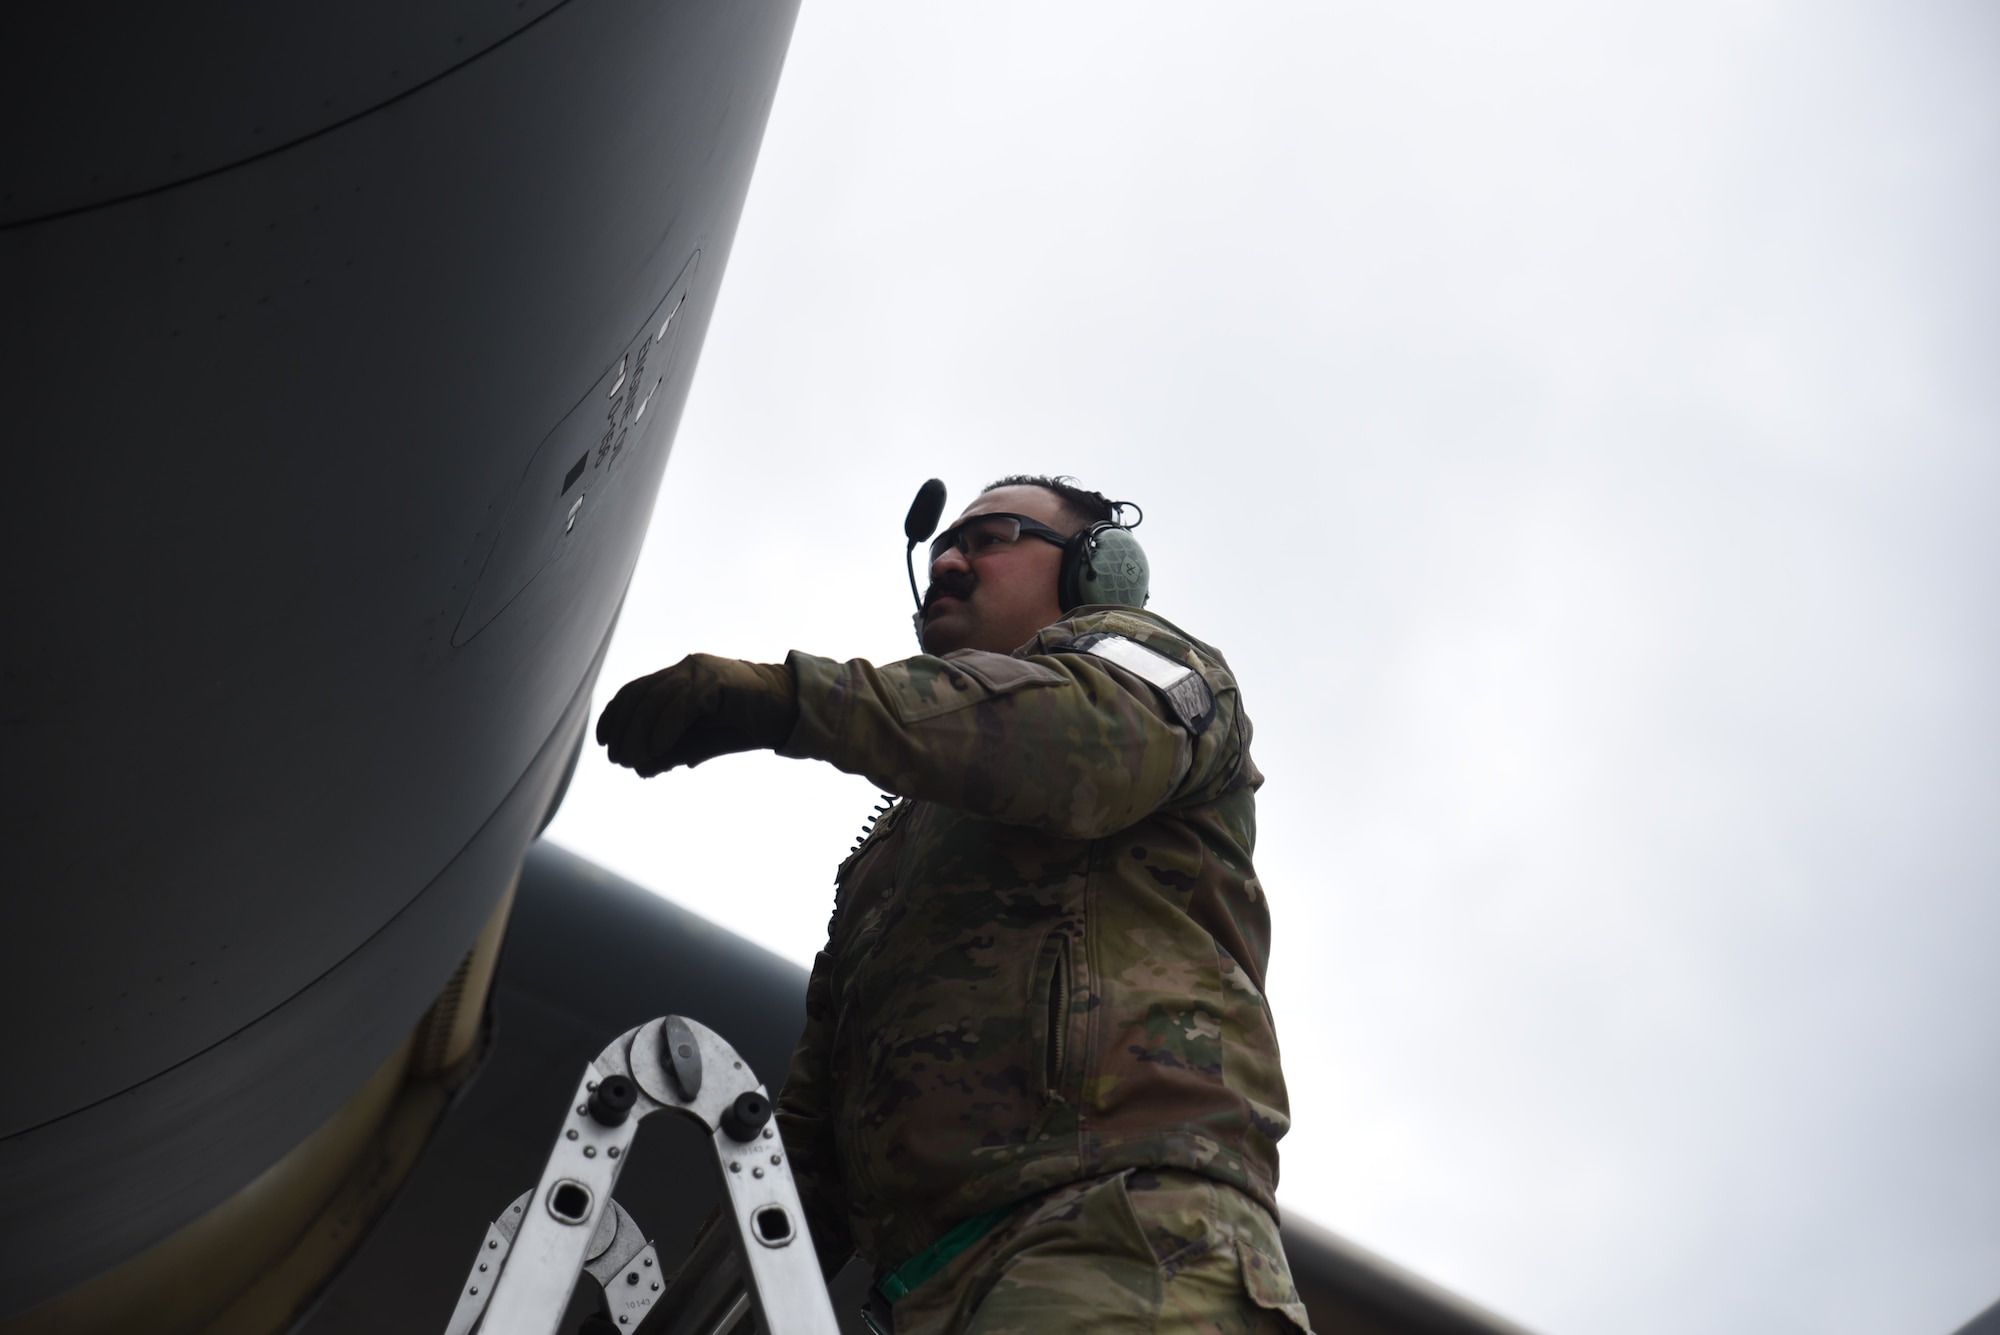 Last week, the 62d Operations Group, 62d Maintenance Group, 8th Airlift Squadron, and the 62d Aircraft Maintenance Squadron worked together to conduct this test in order to unlock critical ground servicing capabilities, allowing expansion of Agile Combat Employment envelope. (U.S. Air Force photos by Airman 1st Class Kylee Tyus)